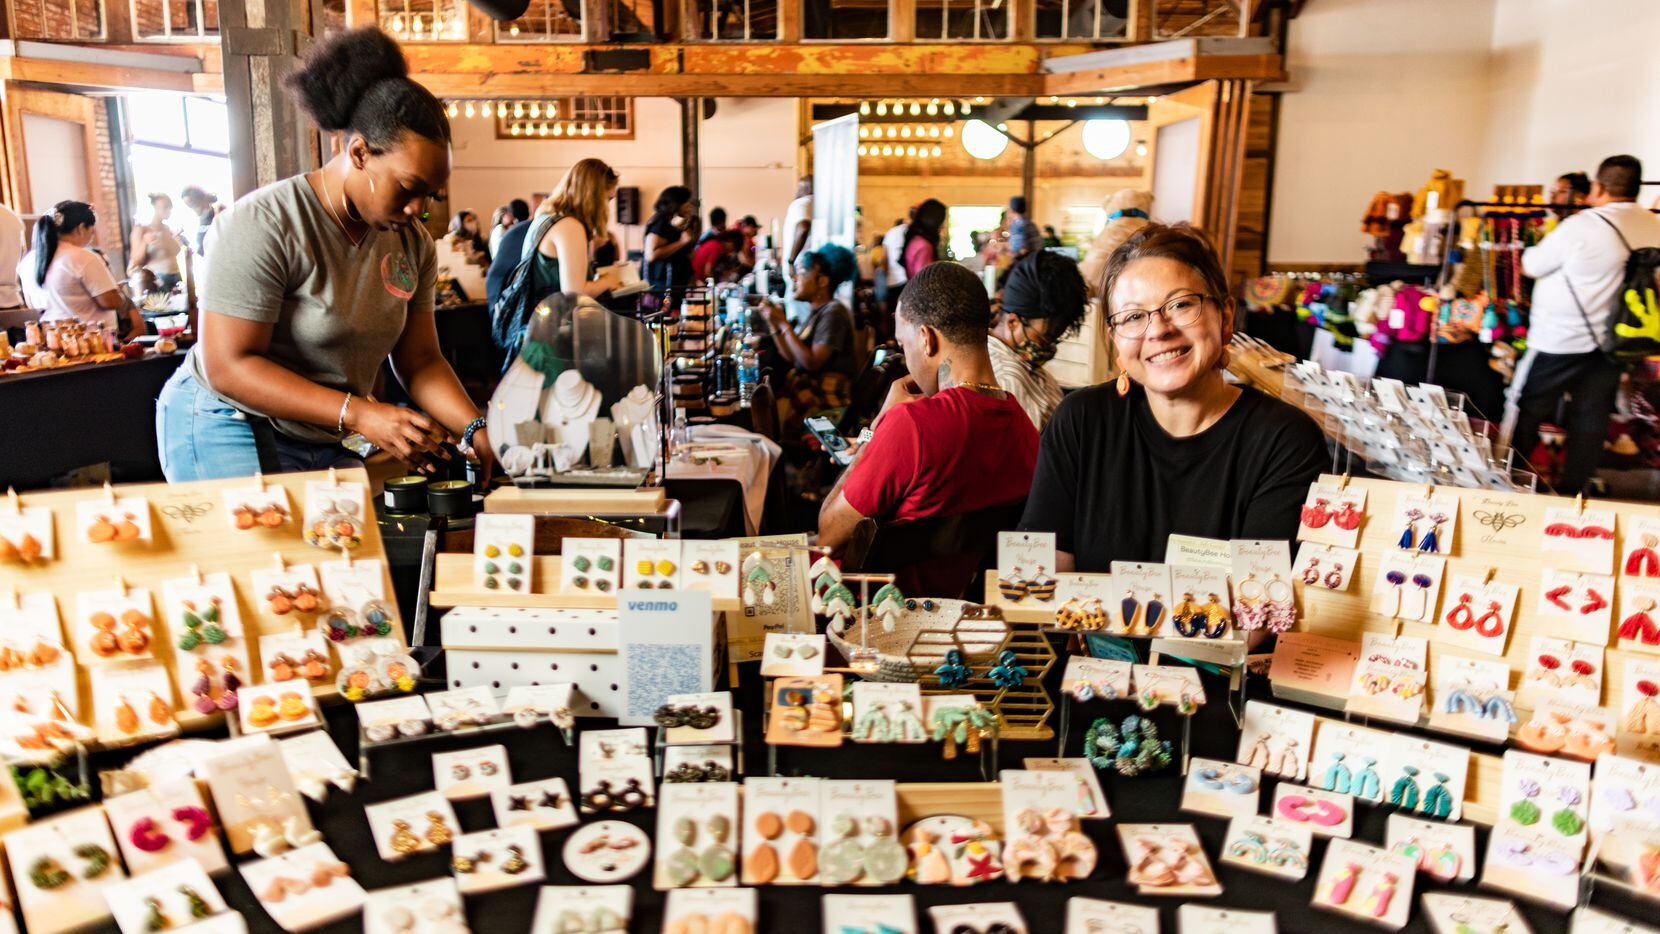 At Dallas Millennial Holiday Market, about 60 small businesses will sell last-minute gifts...